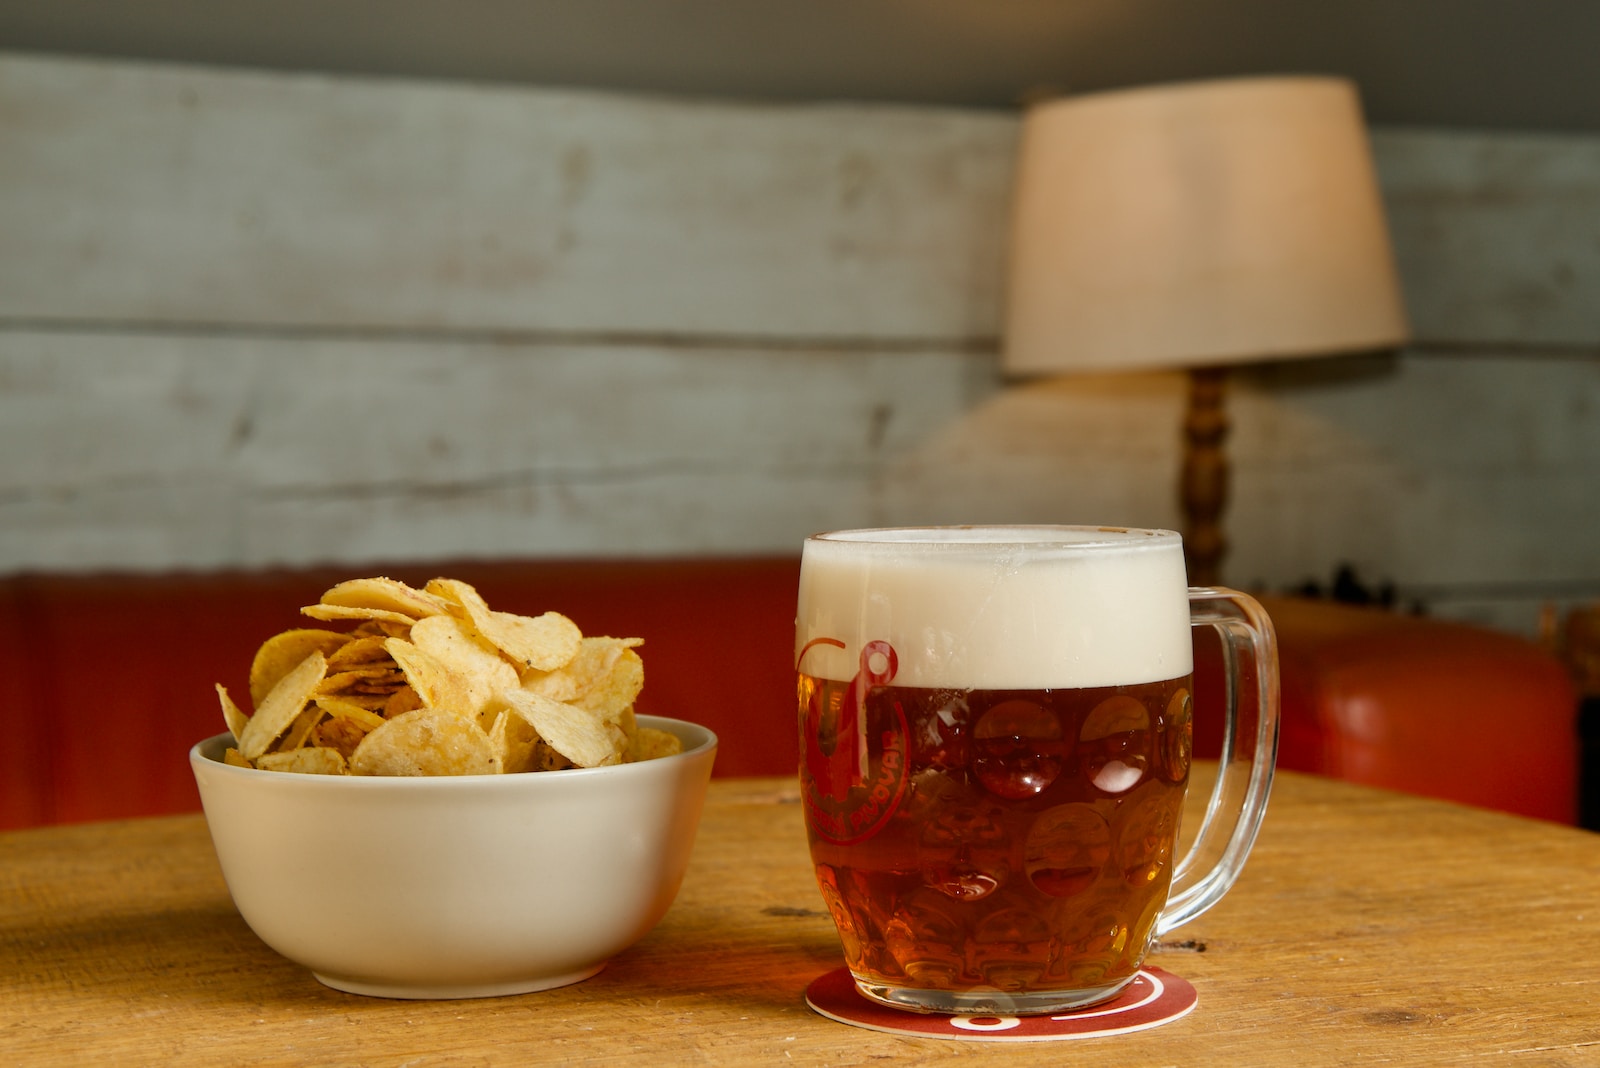 a bowl of chips and a beer on a table